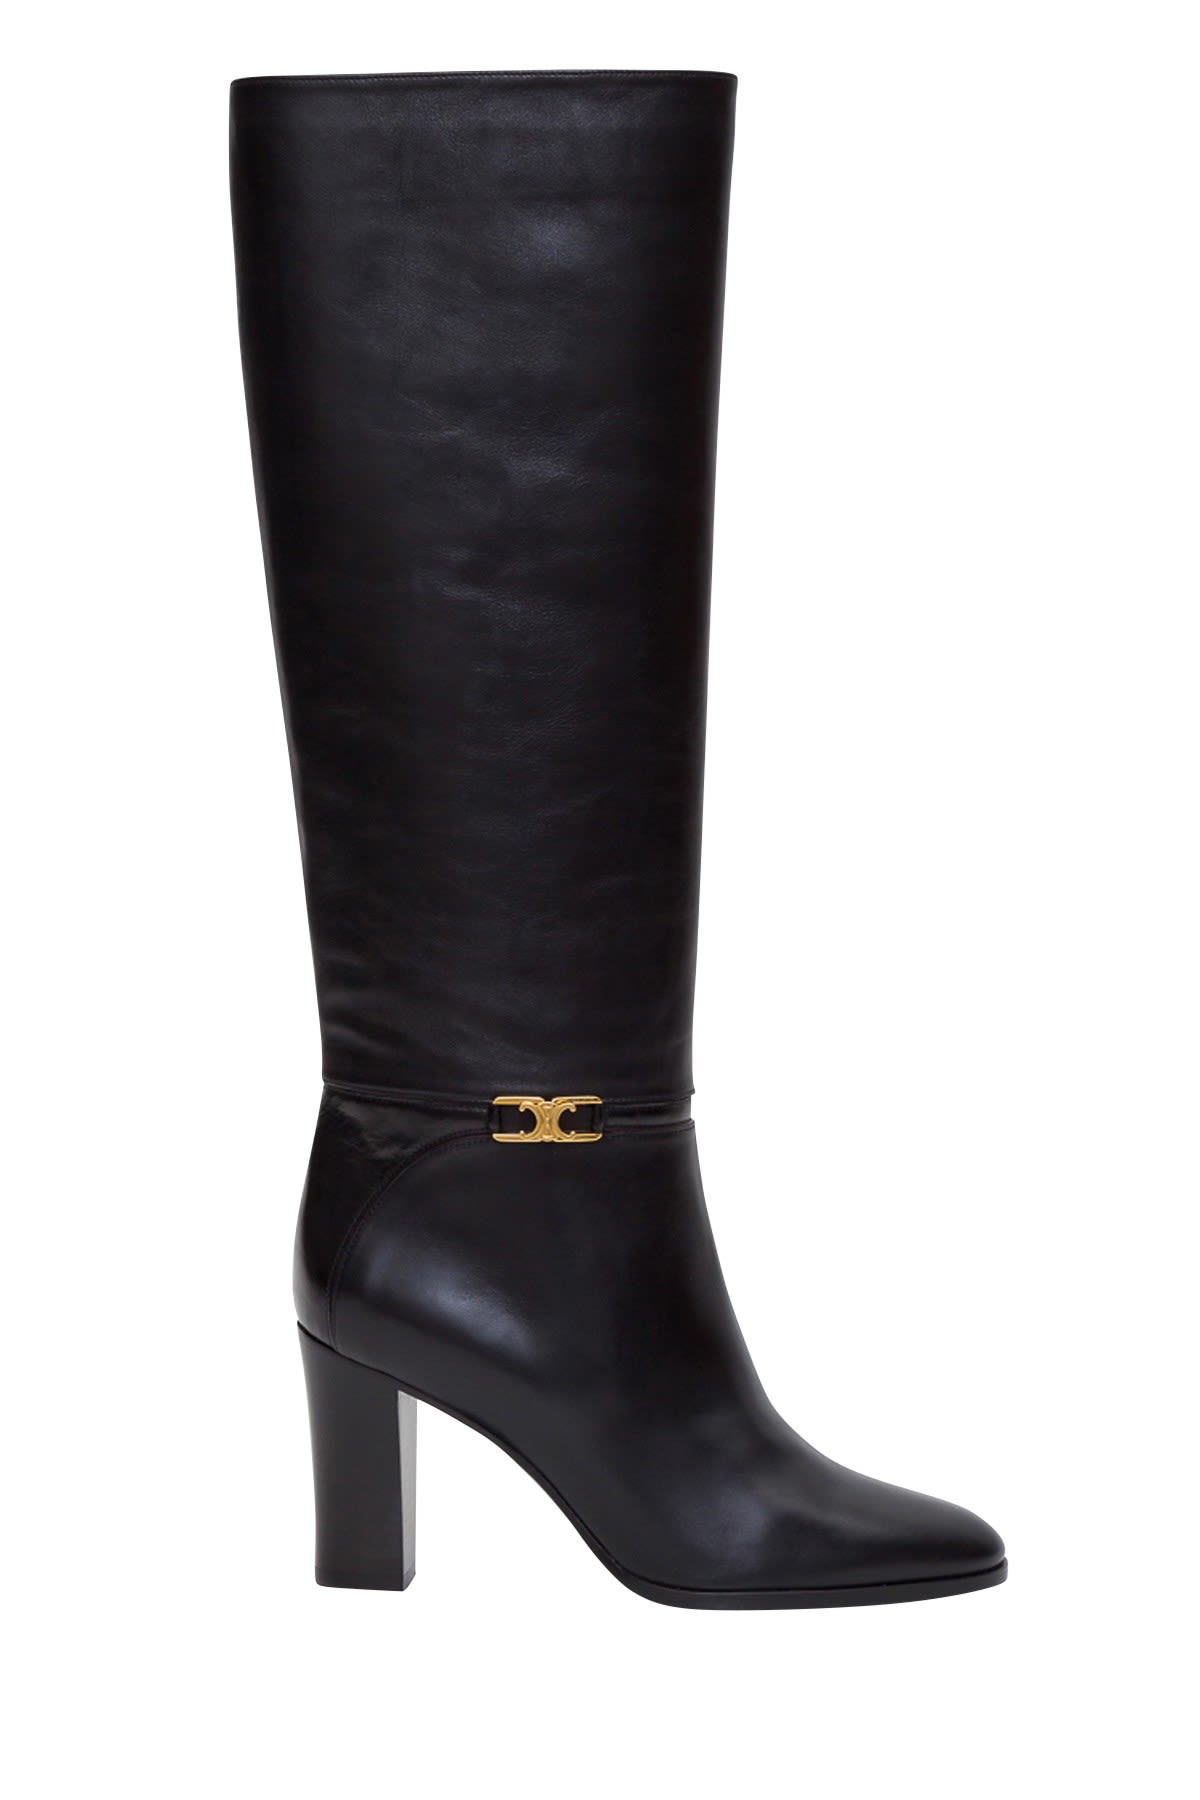 Buy Celine Claude Boots online, shop Celine shoes with free shipping